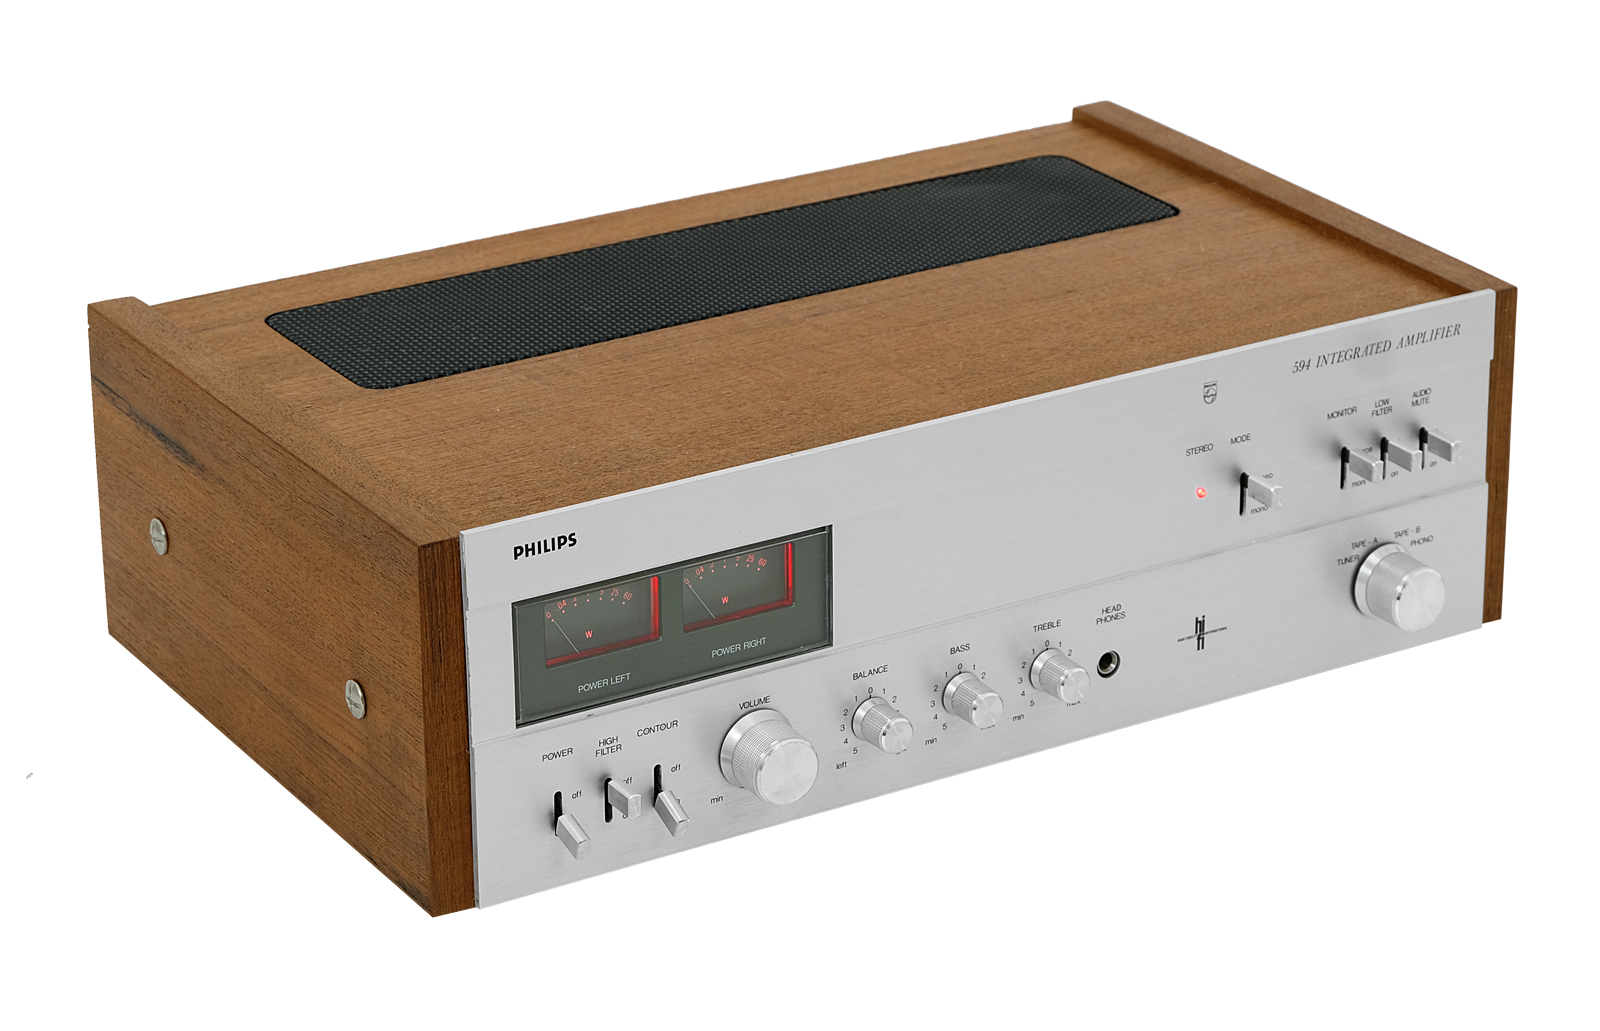 Philips 594 Integrated Amplifier